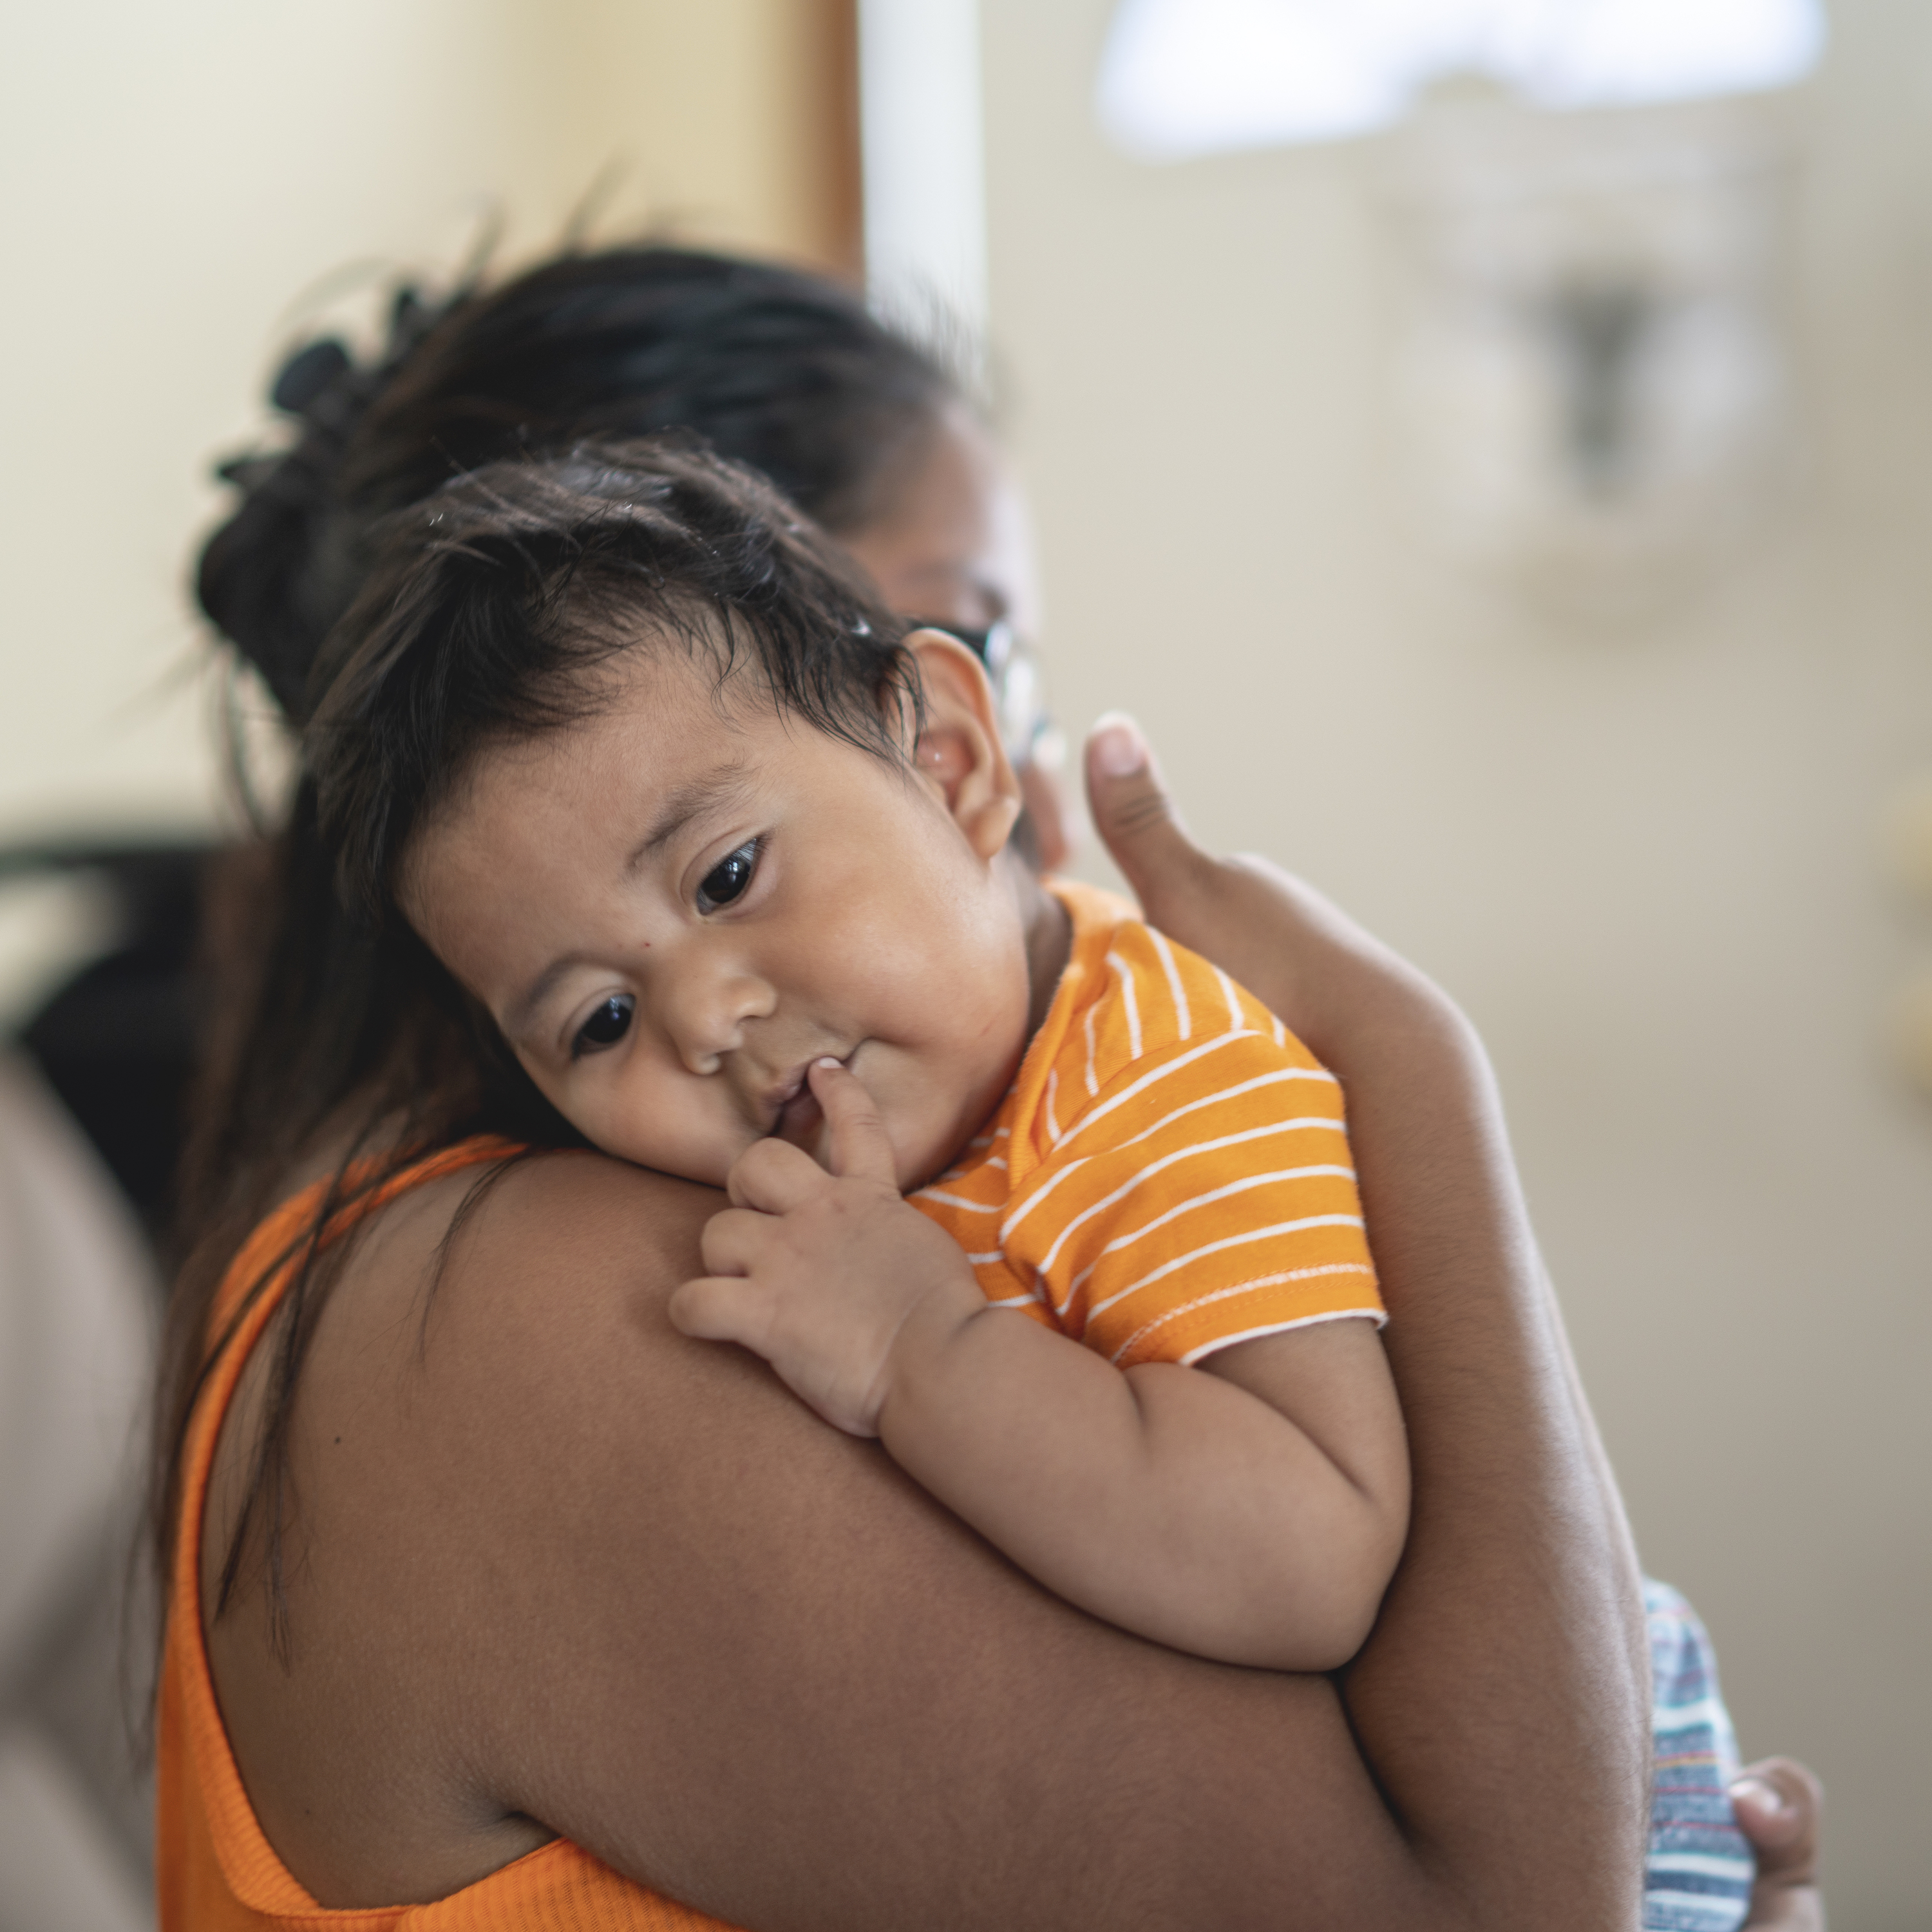 The Latino Mexican-American mother with son, a little boy, in his house in Pennsylvania, USA